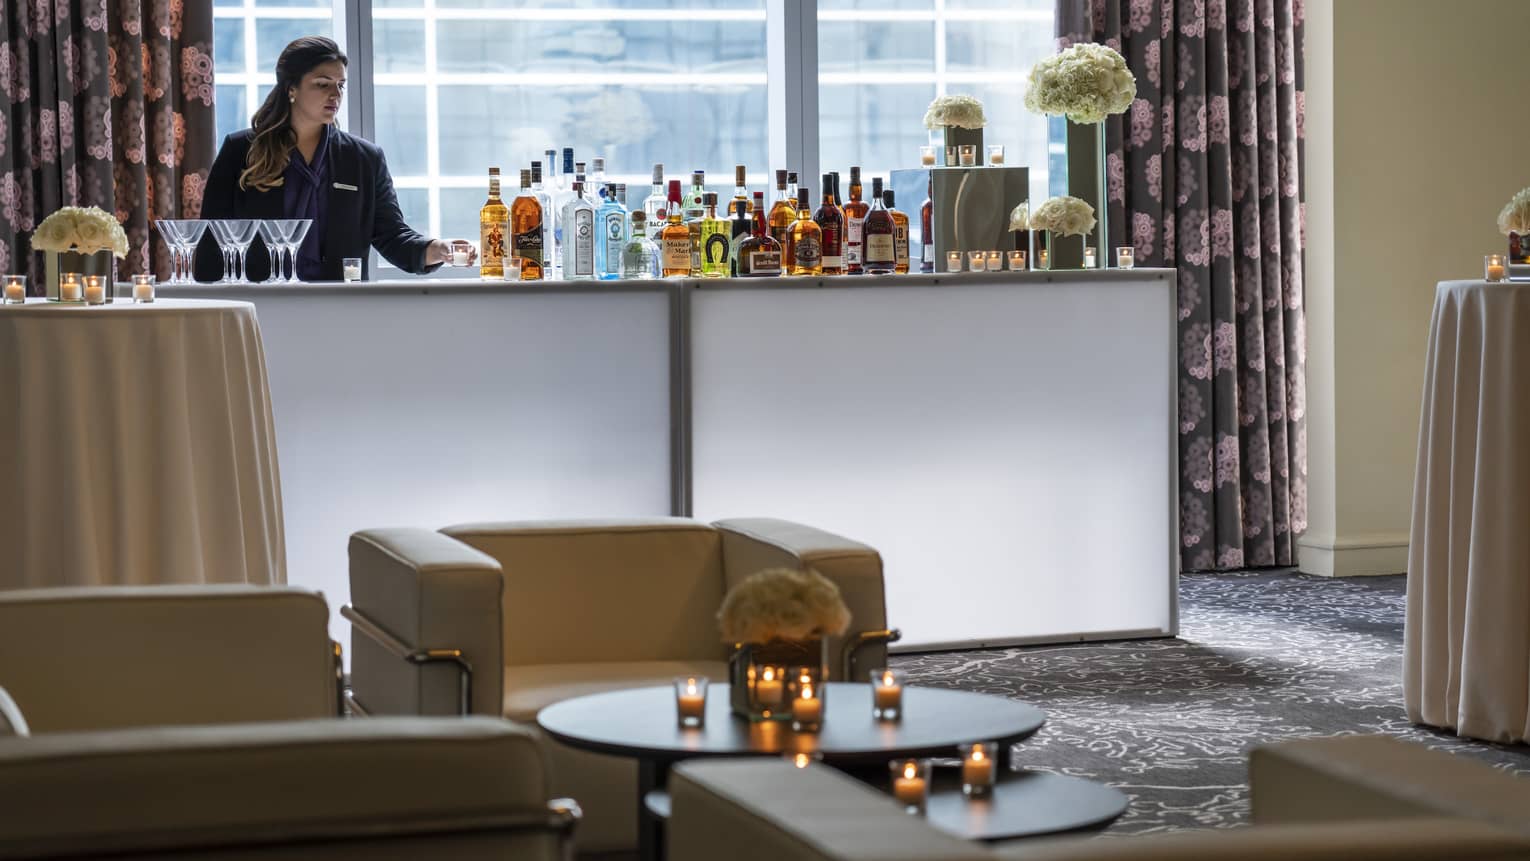 Bartender stands at liquor bottle-lined bar in front of window near seating area